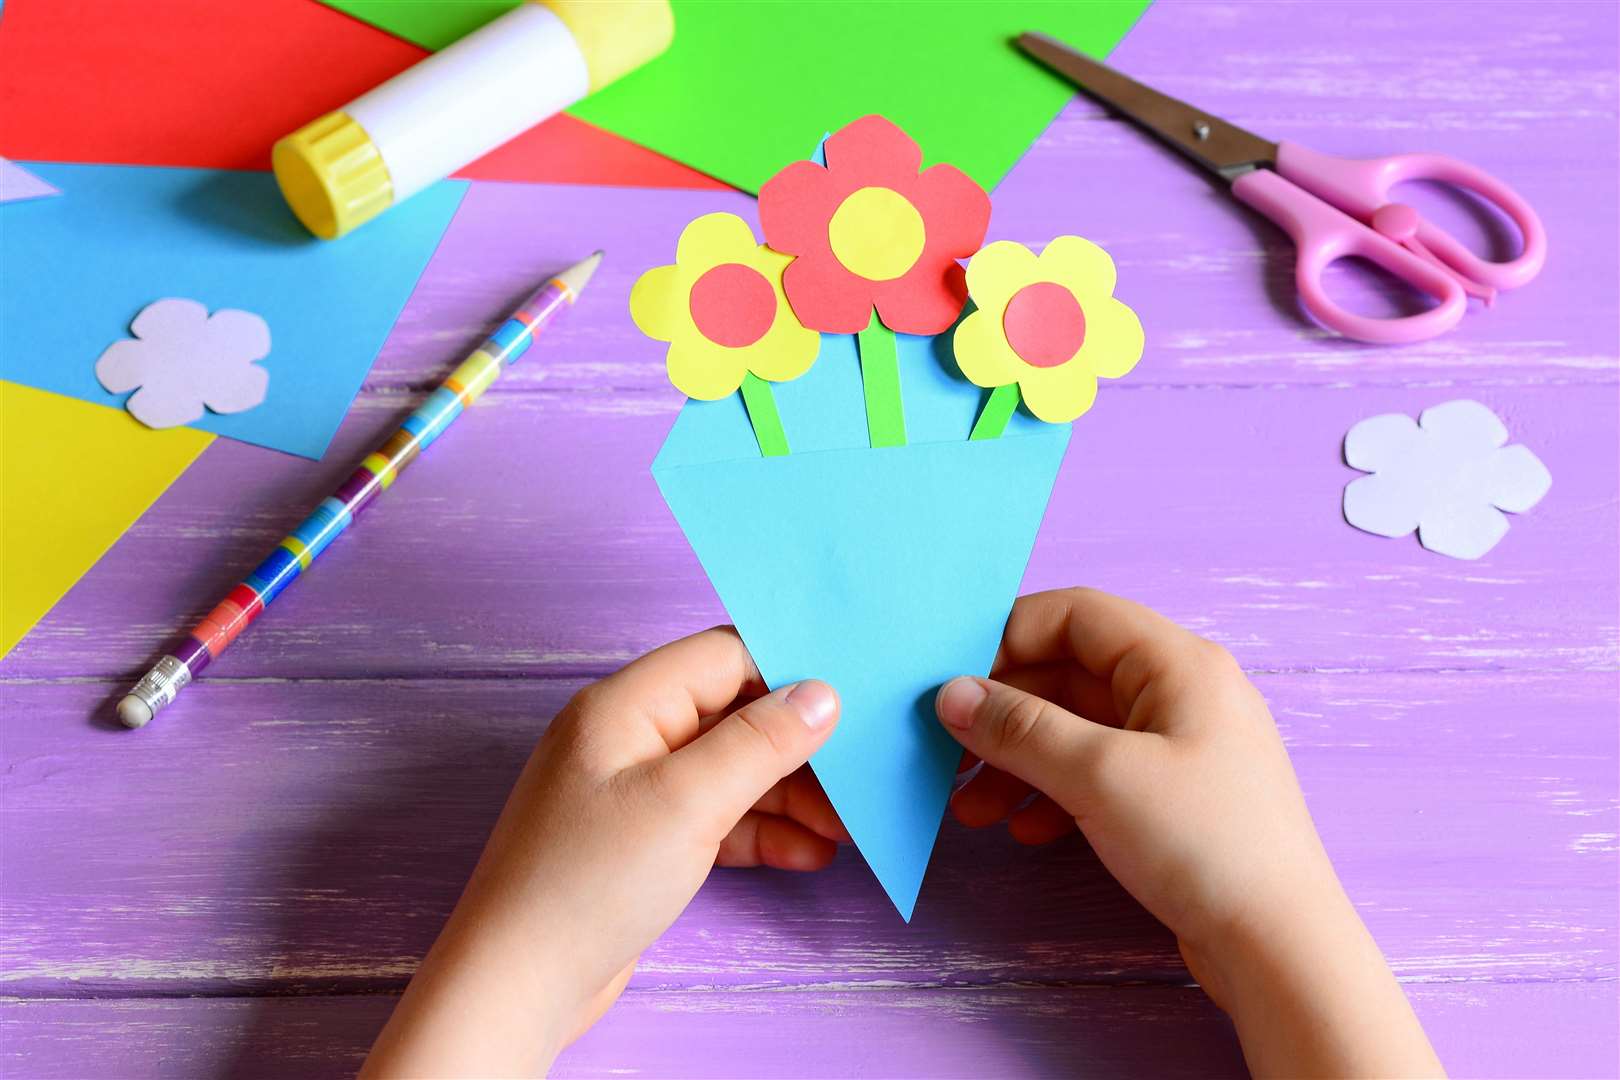 Why not try some paper crafts with the kids during the lockdown/